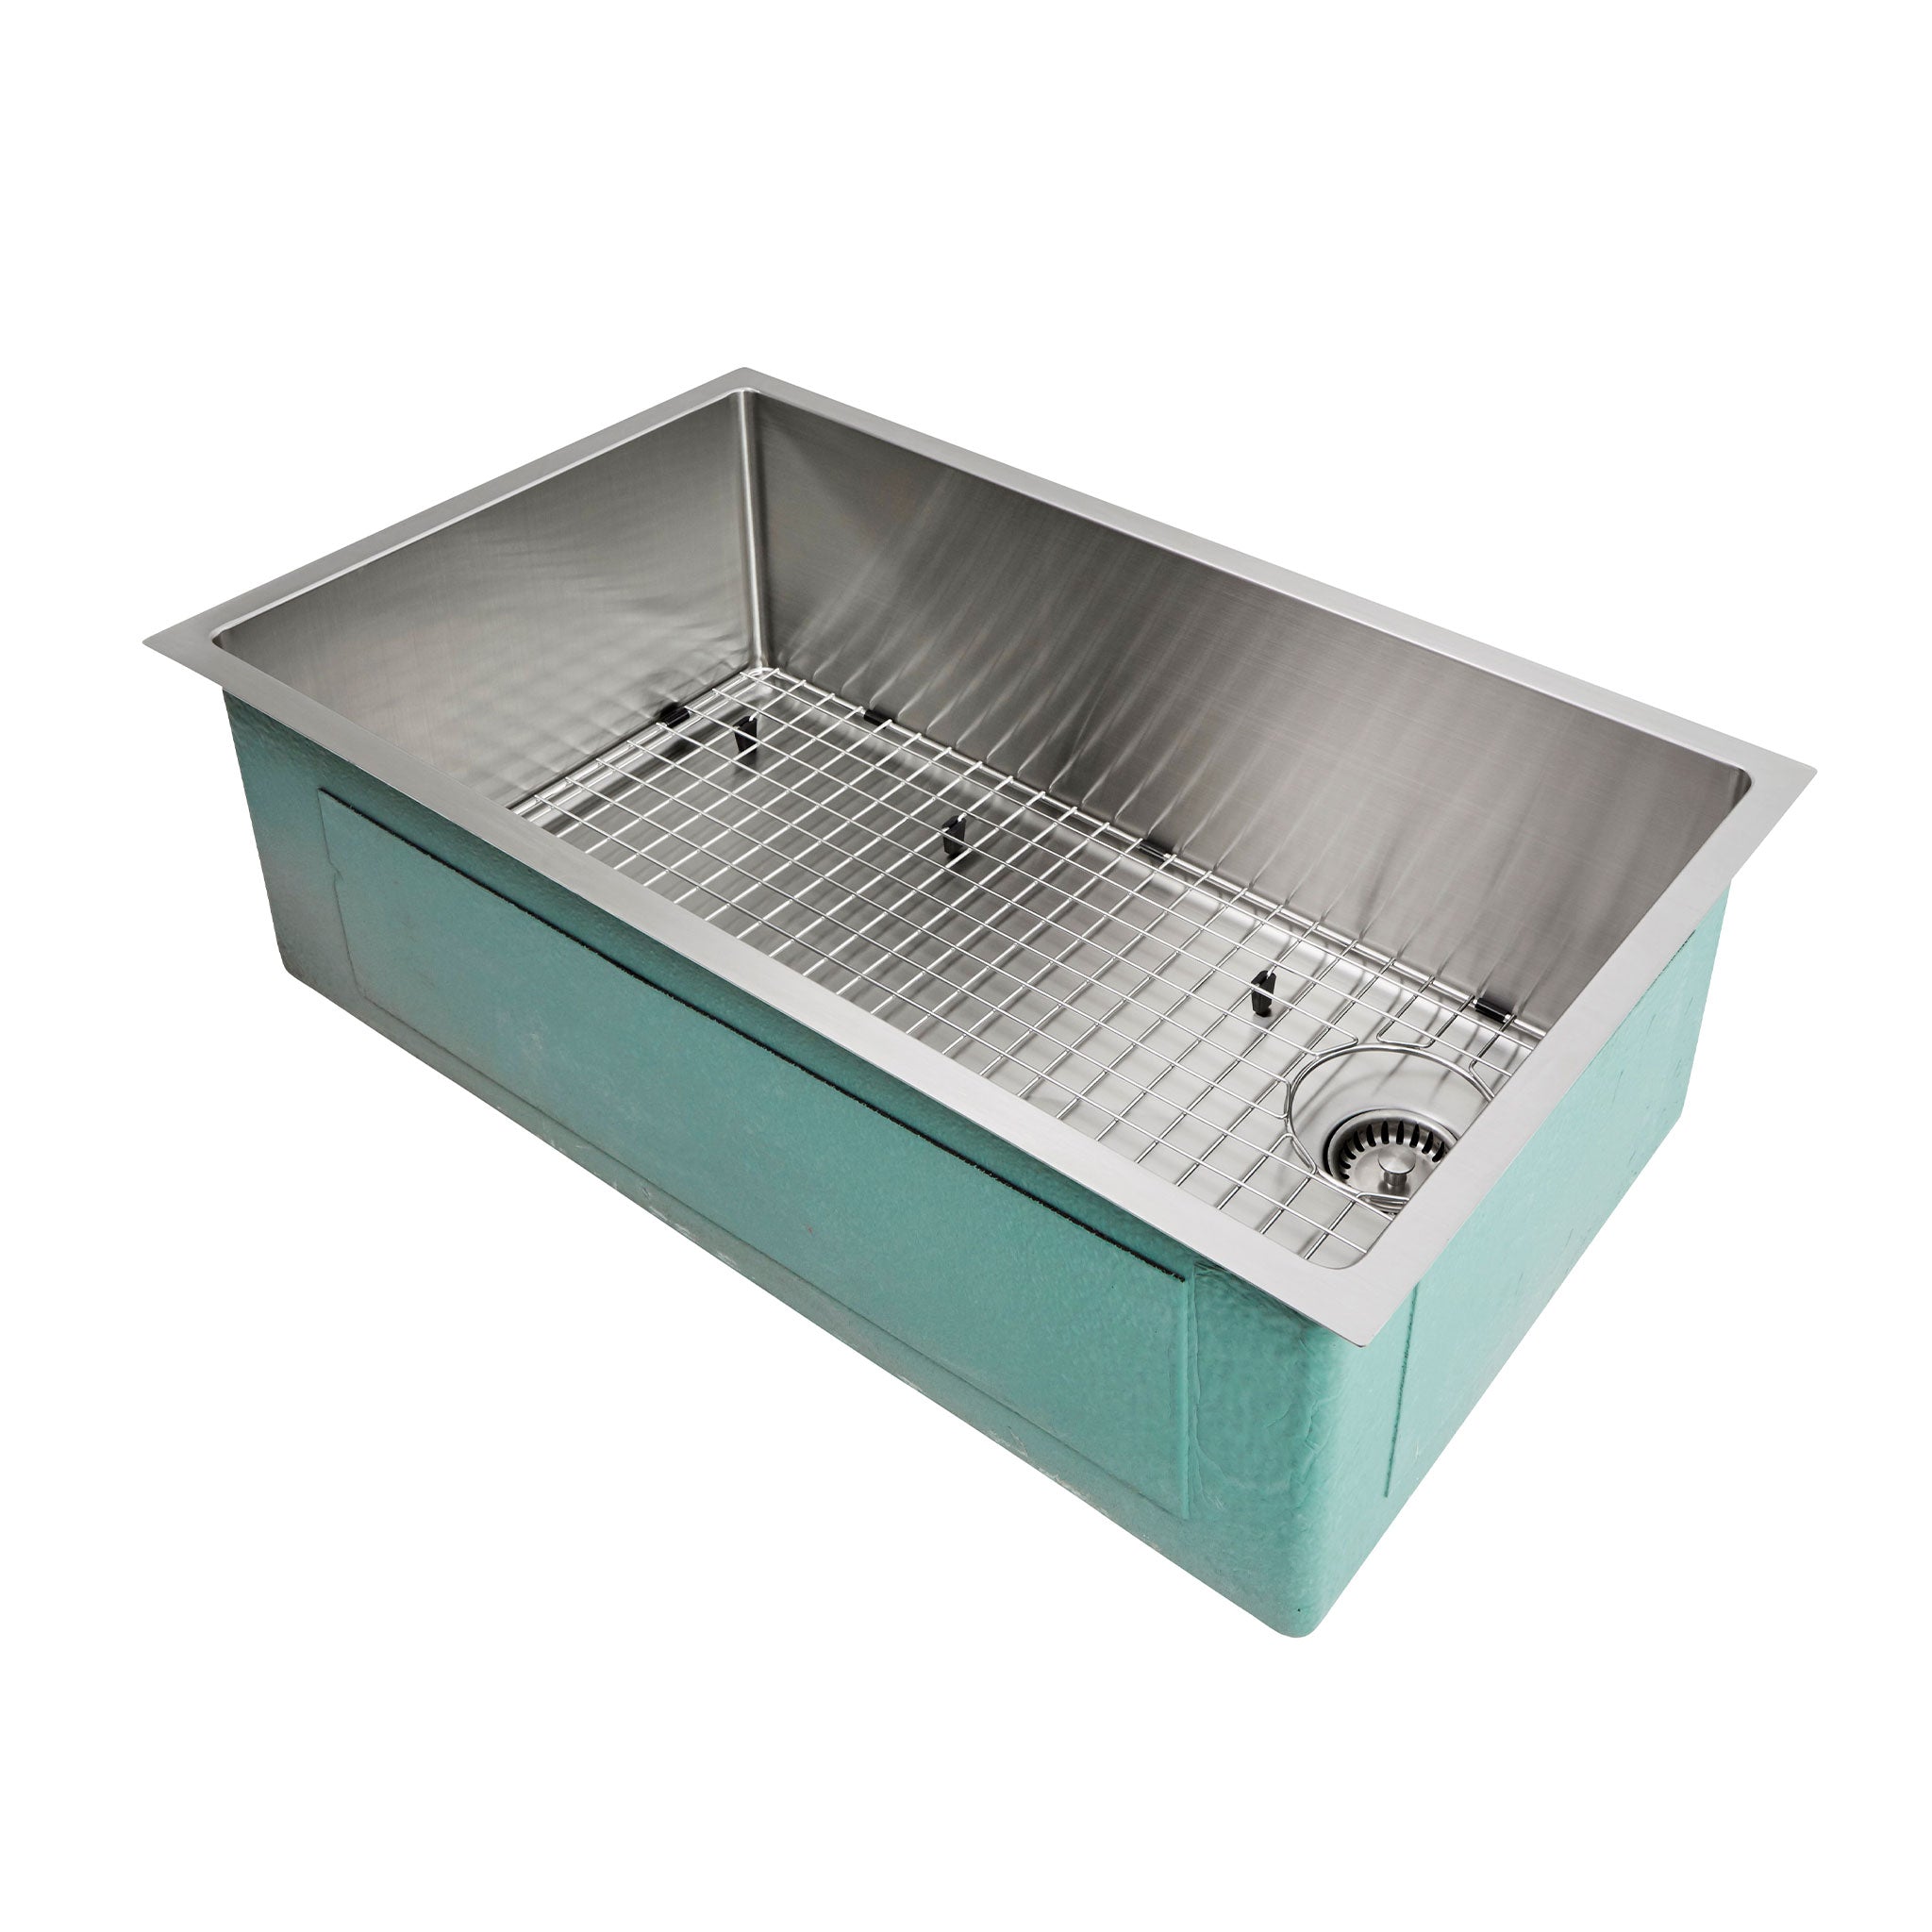 The 32”, classic-style kitchen sink from Create Good Sinks with a stainless steel grid and seamless drain.